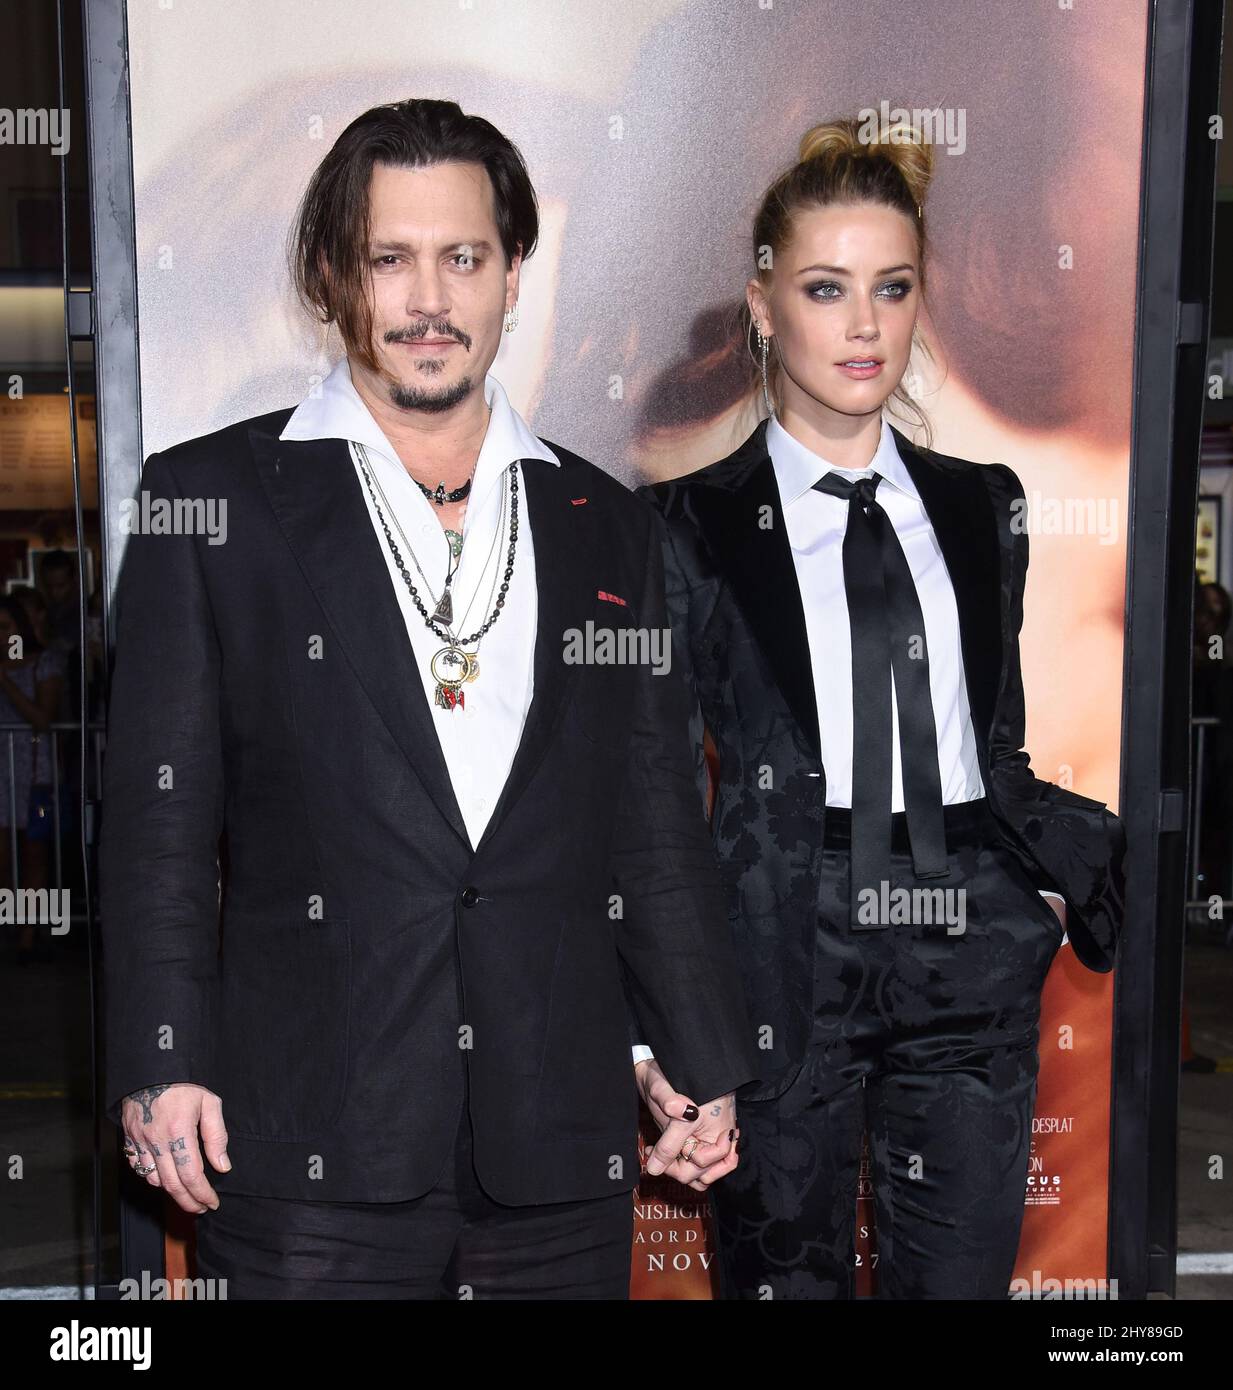 Johnny Depp and Amber Heard arrives at the premiere of 'The Danish Girl' at Regency Village Theatre on Saturday, Nov. 21, 2015 in Los Angeles. Stock Photo